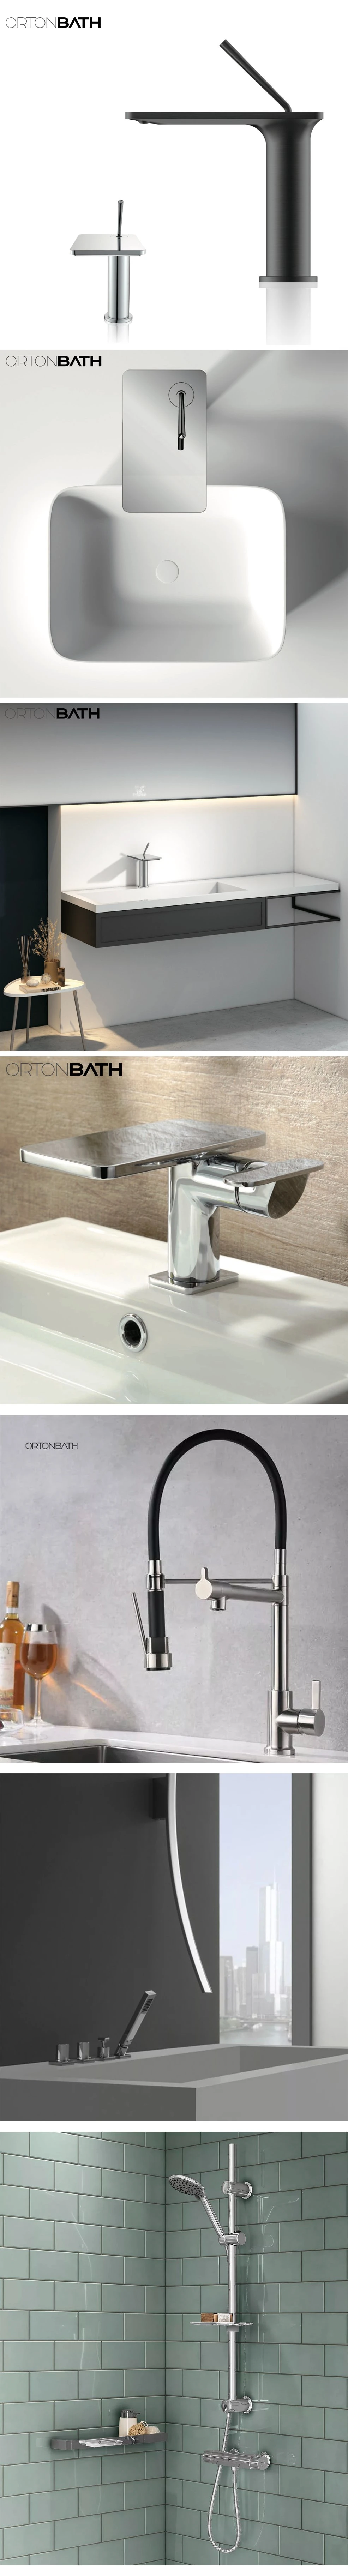 Ortonbath Australian Bathroom Black Golden Brass Wall Mounted Single Lever Cold and Hot Sink Faucet Basin Mixer Water Tap